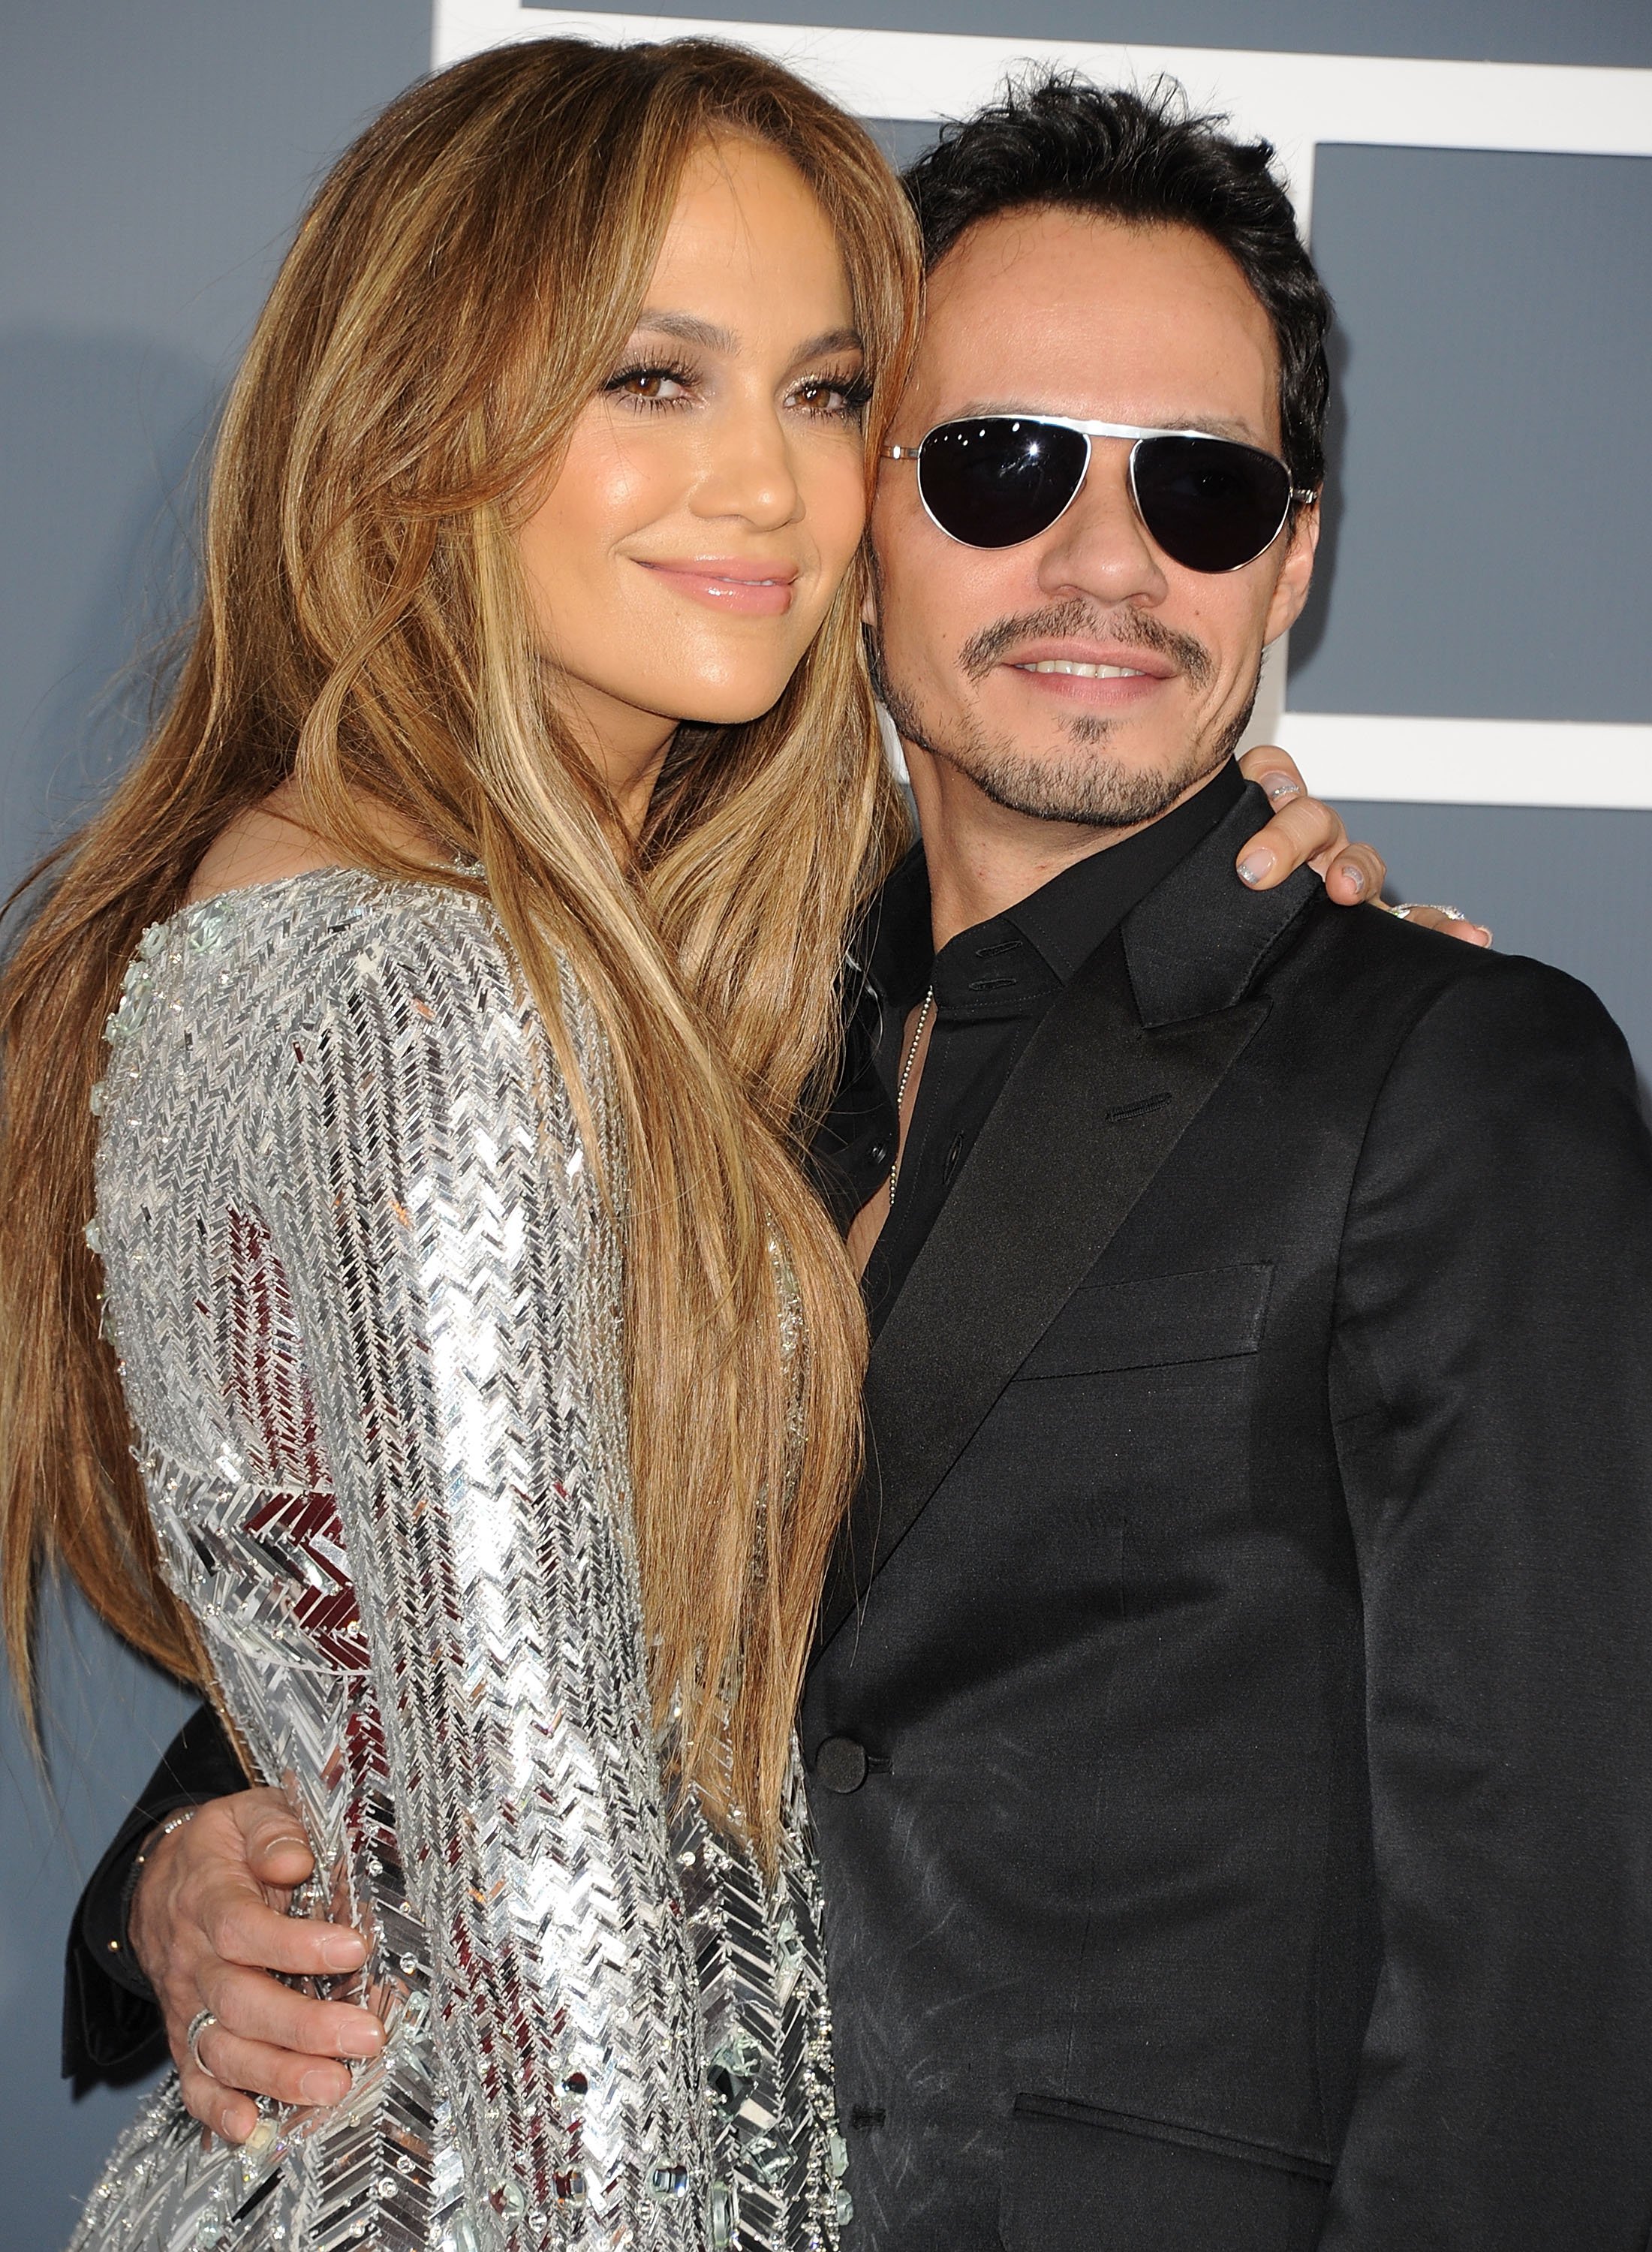  Jennifer Lopez and singer Marc Anthony arrive at The 53rd Annual GRAMMY Awards held at Staples Center on February 13, 2011, in Los Angeles, California. | Source: Getty Images.